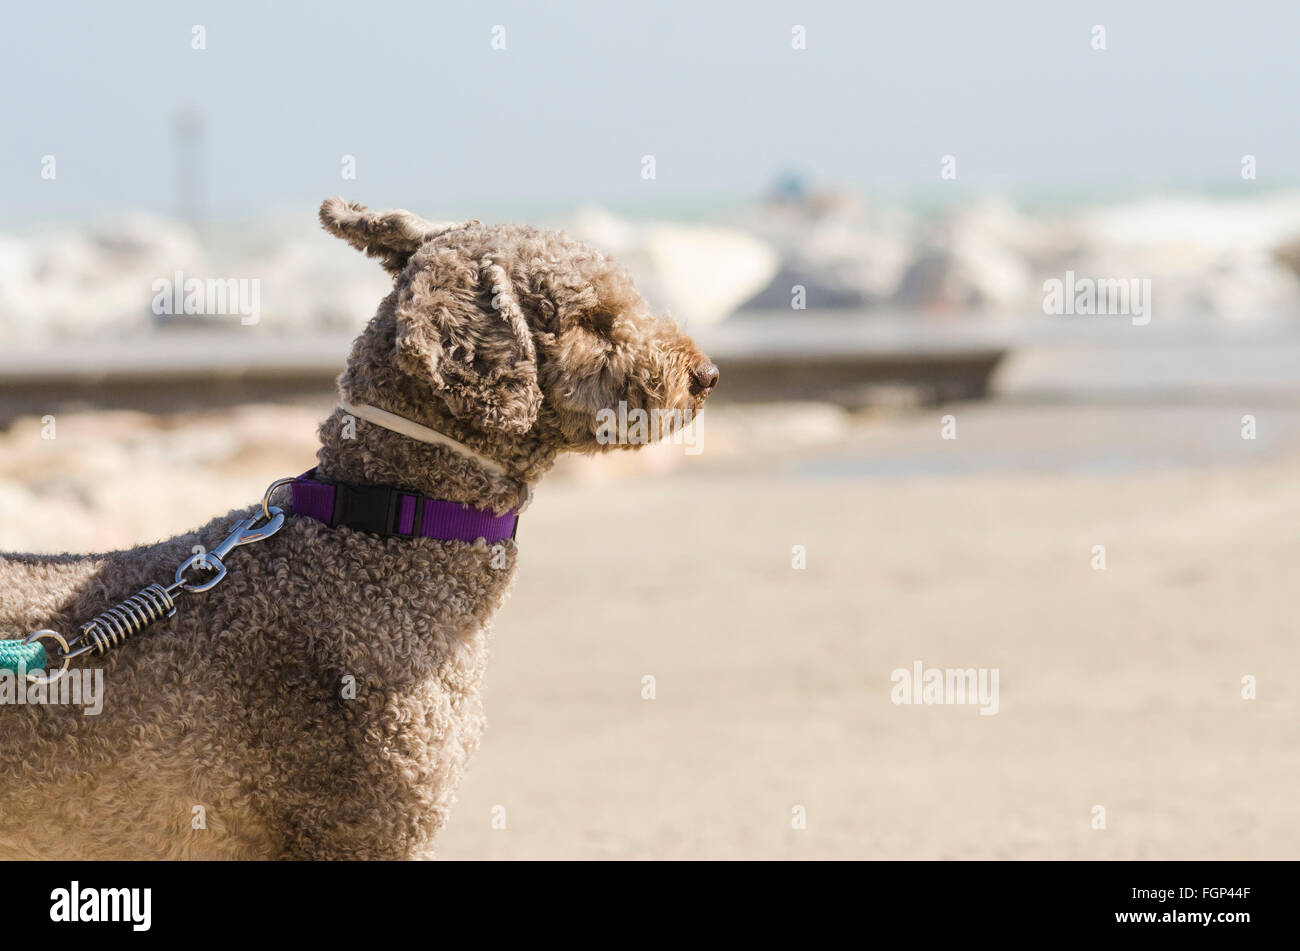 Dog on leash with collar at seaside. Stock Photo